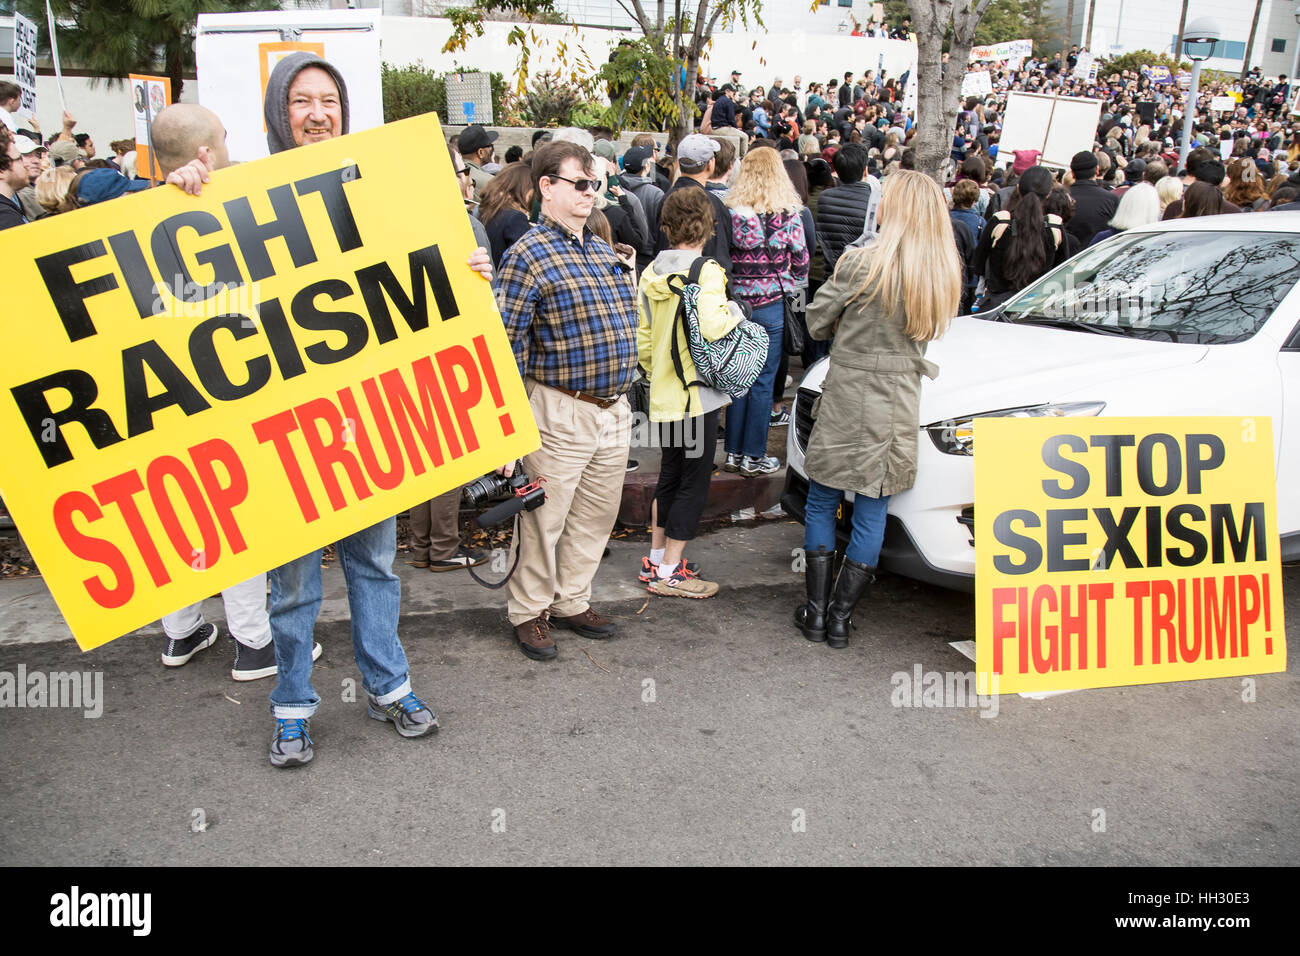 Los Angeles, USA. 15th Jan, 2017. Protesters carry signs opposing Donald Trump at the Los Angeles rally to save the Affordable Care Act at LAC/USC Medical Center. Credit: Andie Mills/Alamy Live News. Stock Photo